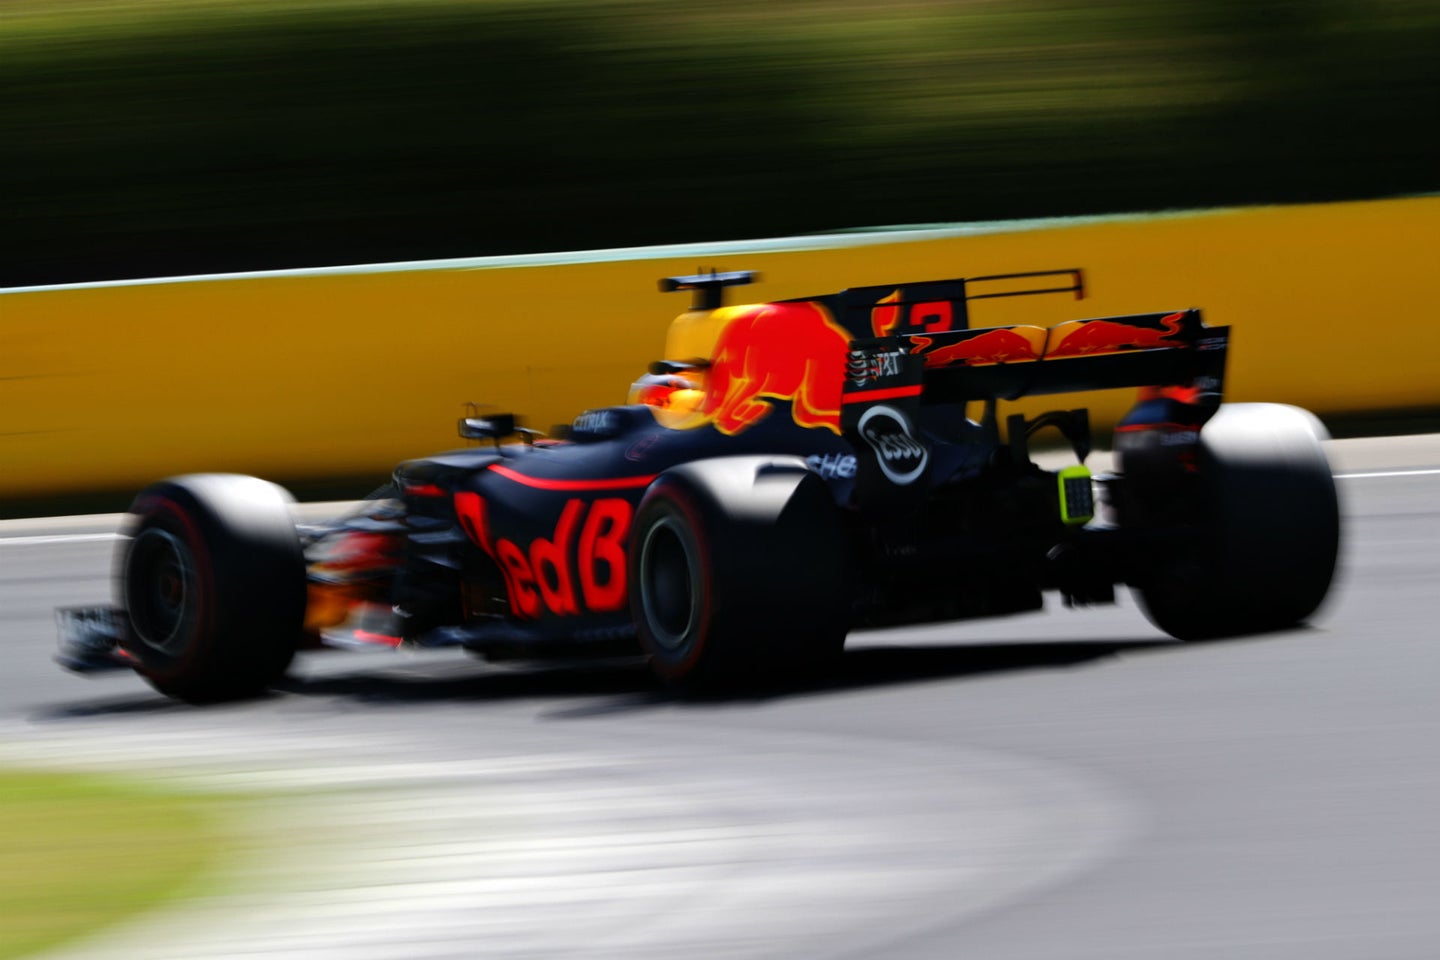 Ricciardo Leads After Day 1 of Hungarian Grand Prix Practice